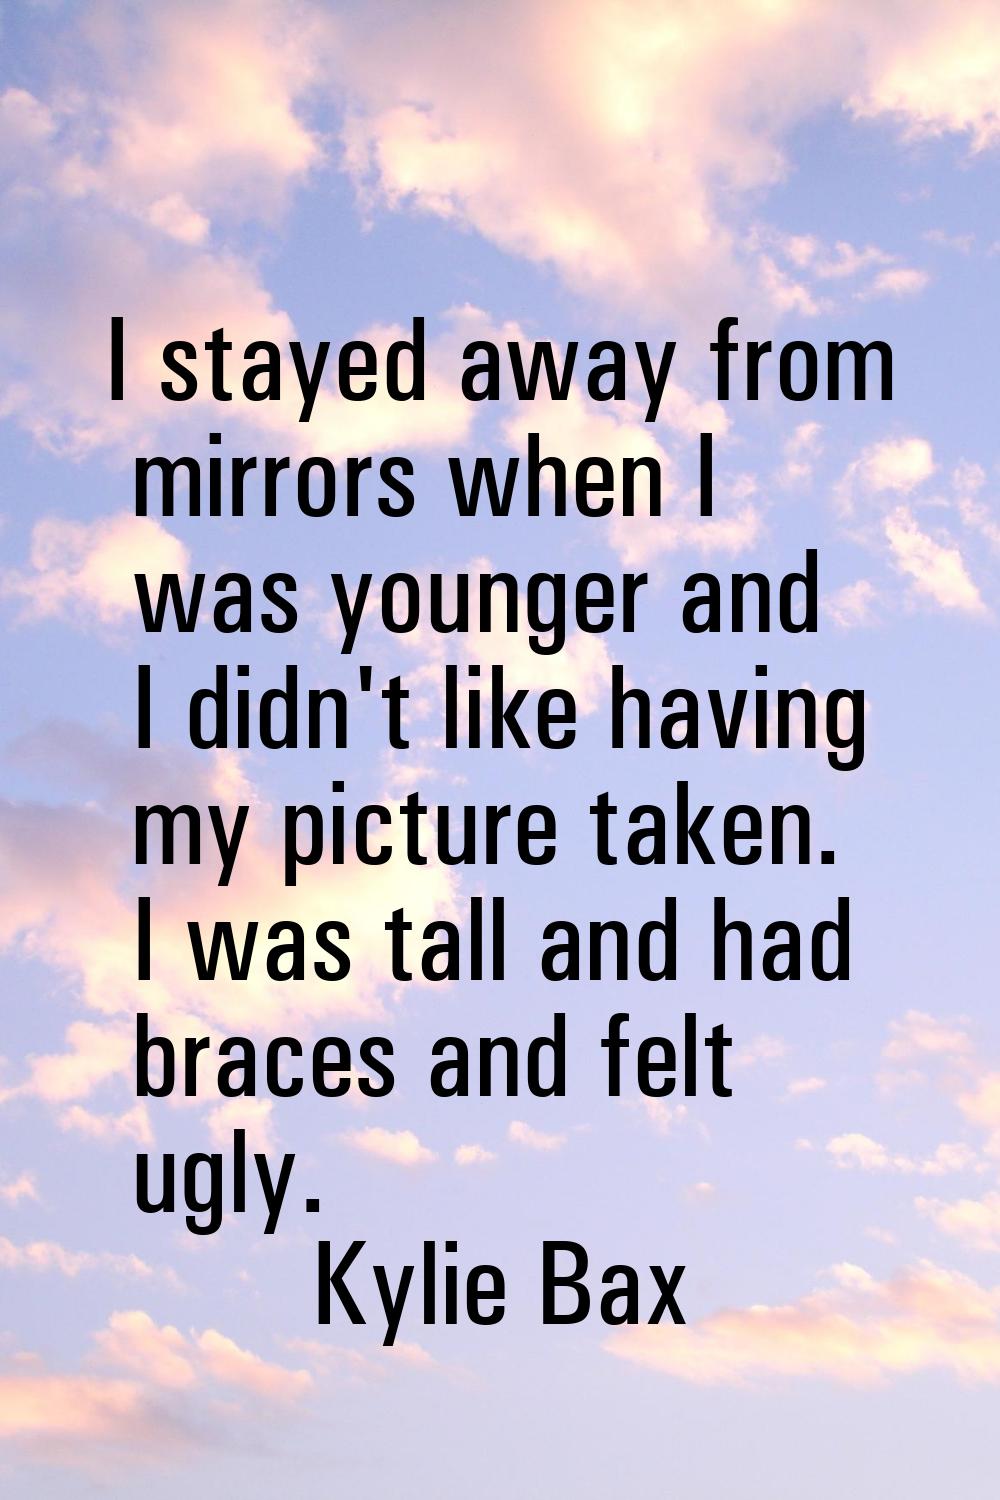 I stayed away from mirrors when I was younger and I didn't like having my picture taken. I was tall